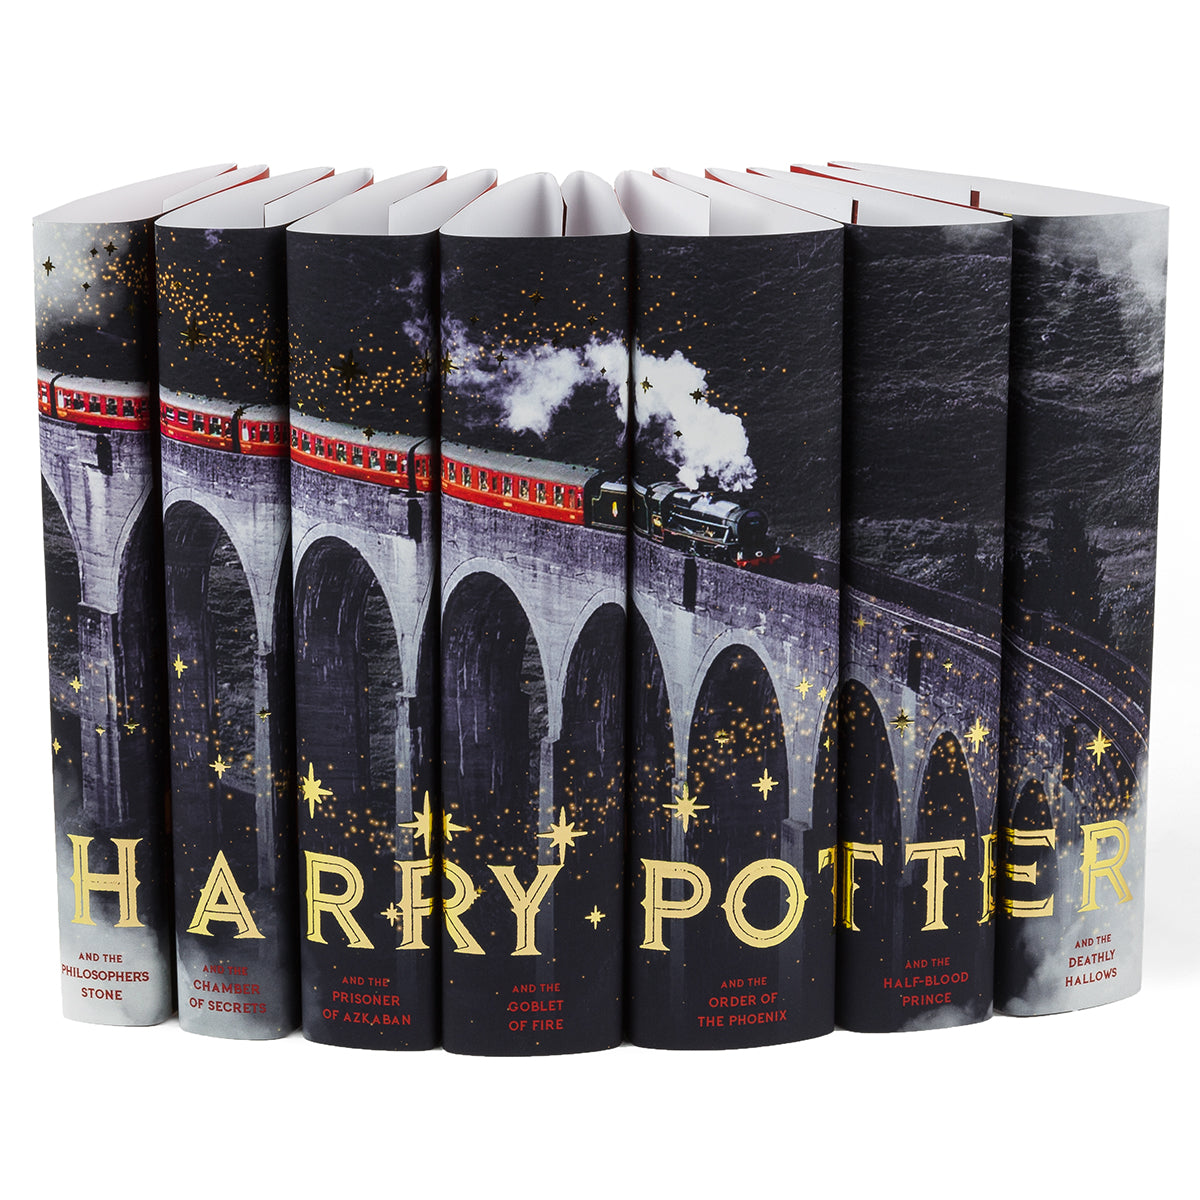 harry potter book collection hardcover